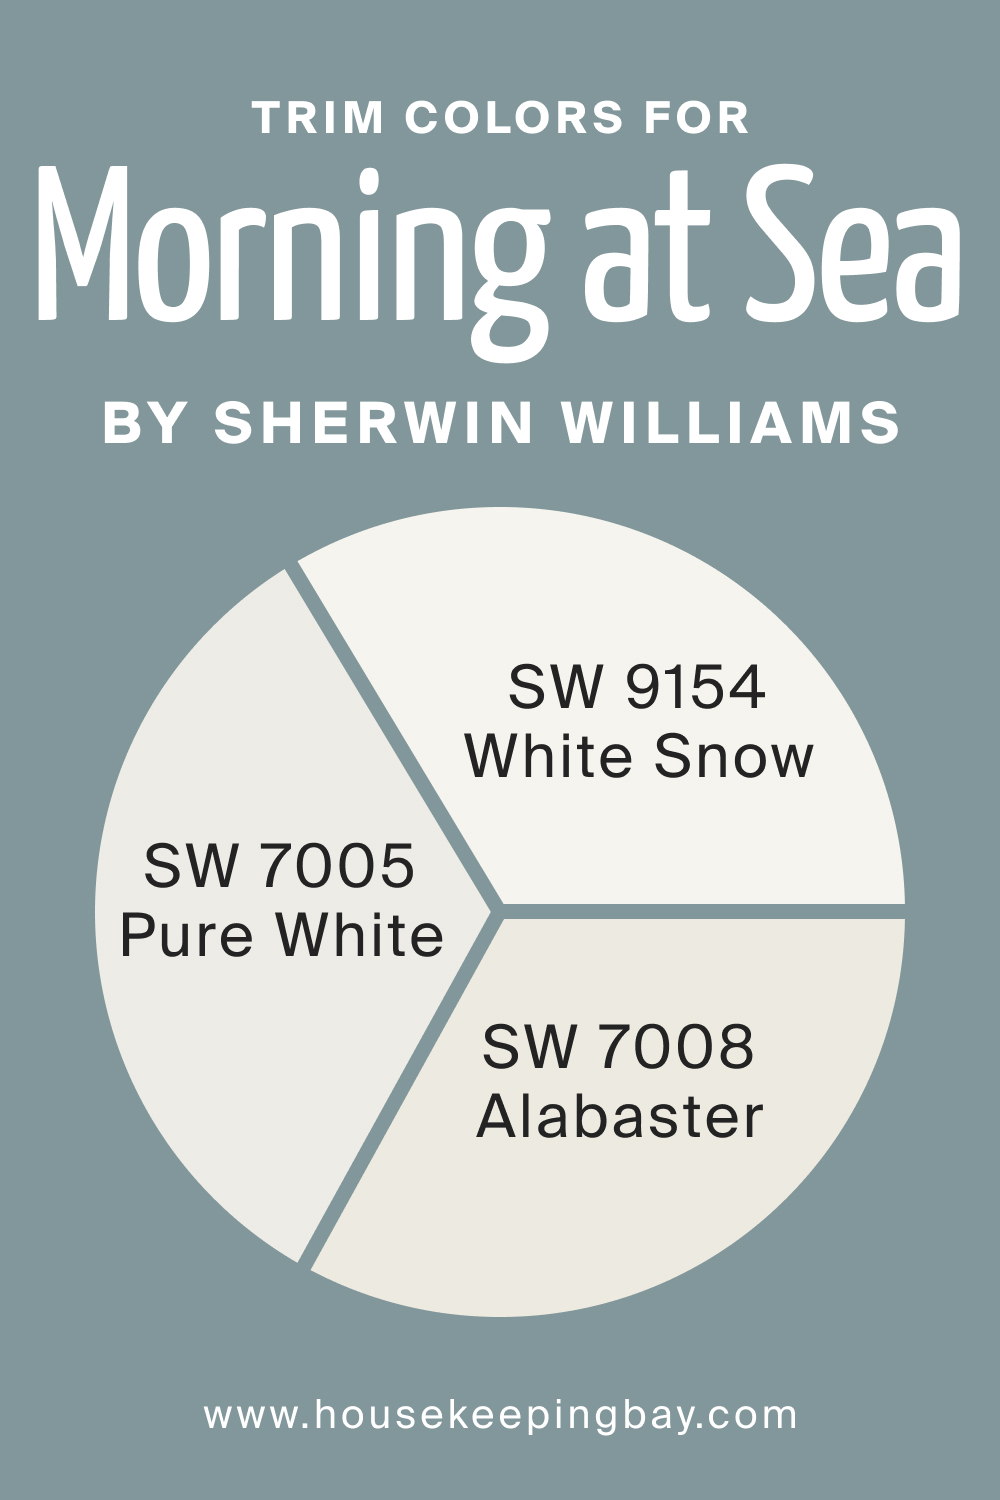 Trim Colors of SW 9634 Morning at Sea by Sherwin Williams